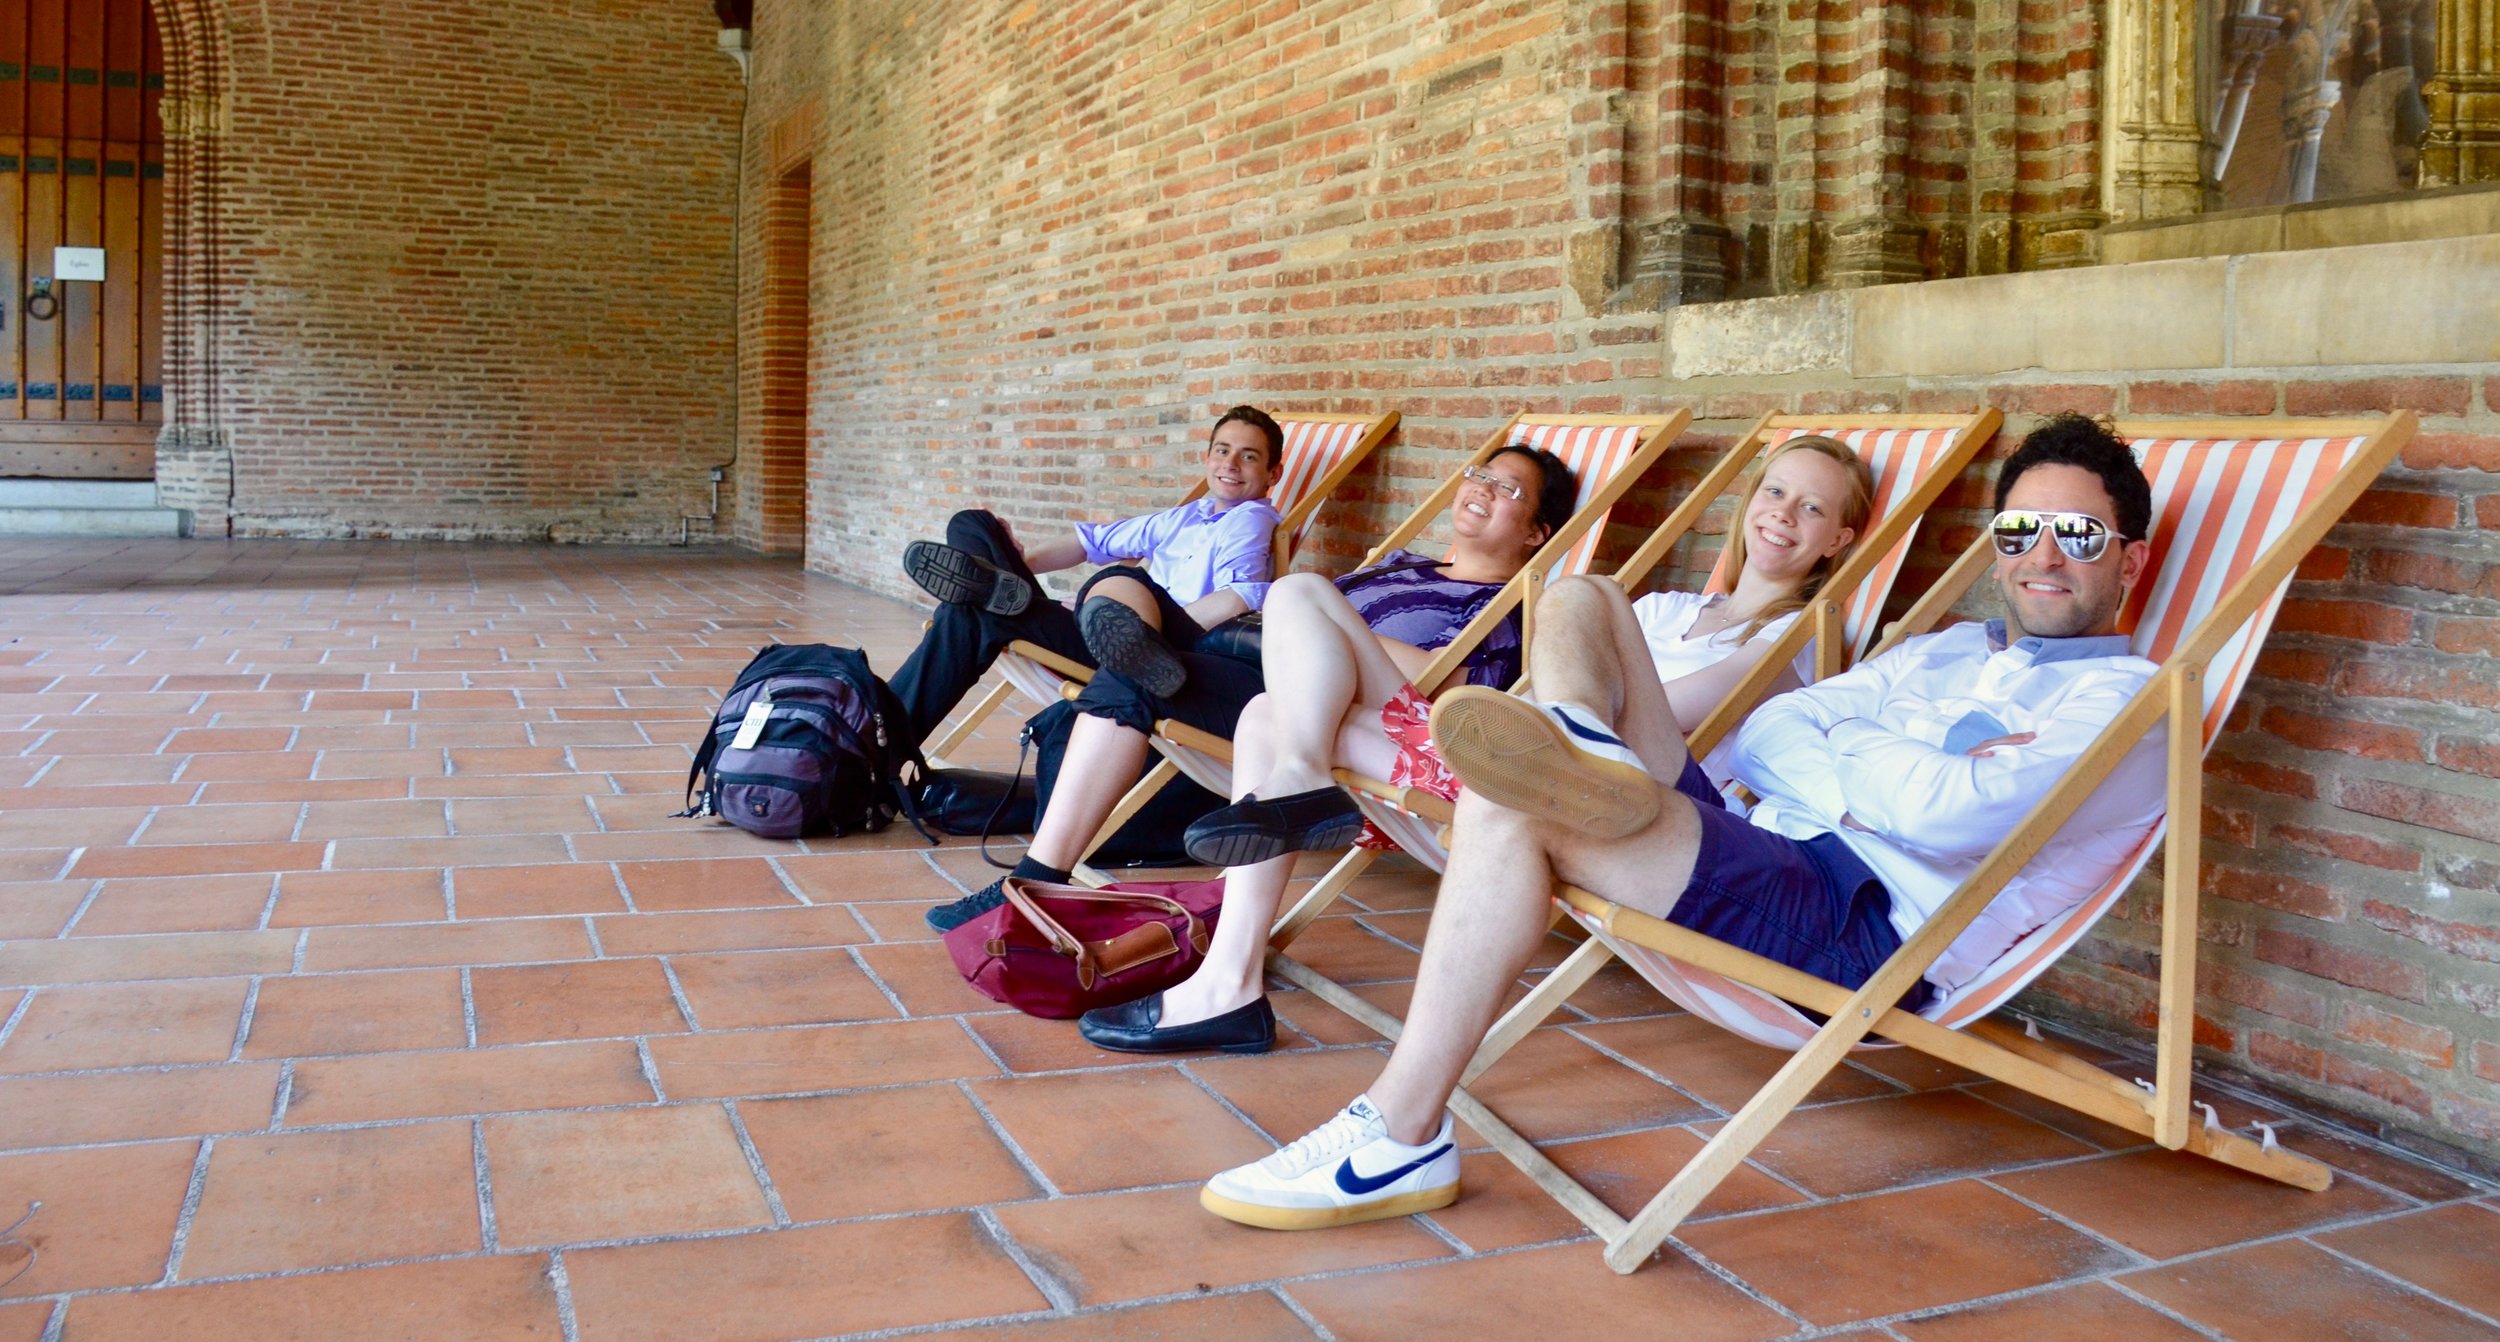 Gianmarco Massameno, Laura Gullett, Noel de Sa e Silva, and David von Behren relaxing in the cloister of Musee des Augustins, Toulouse.